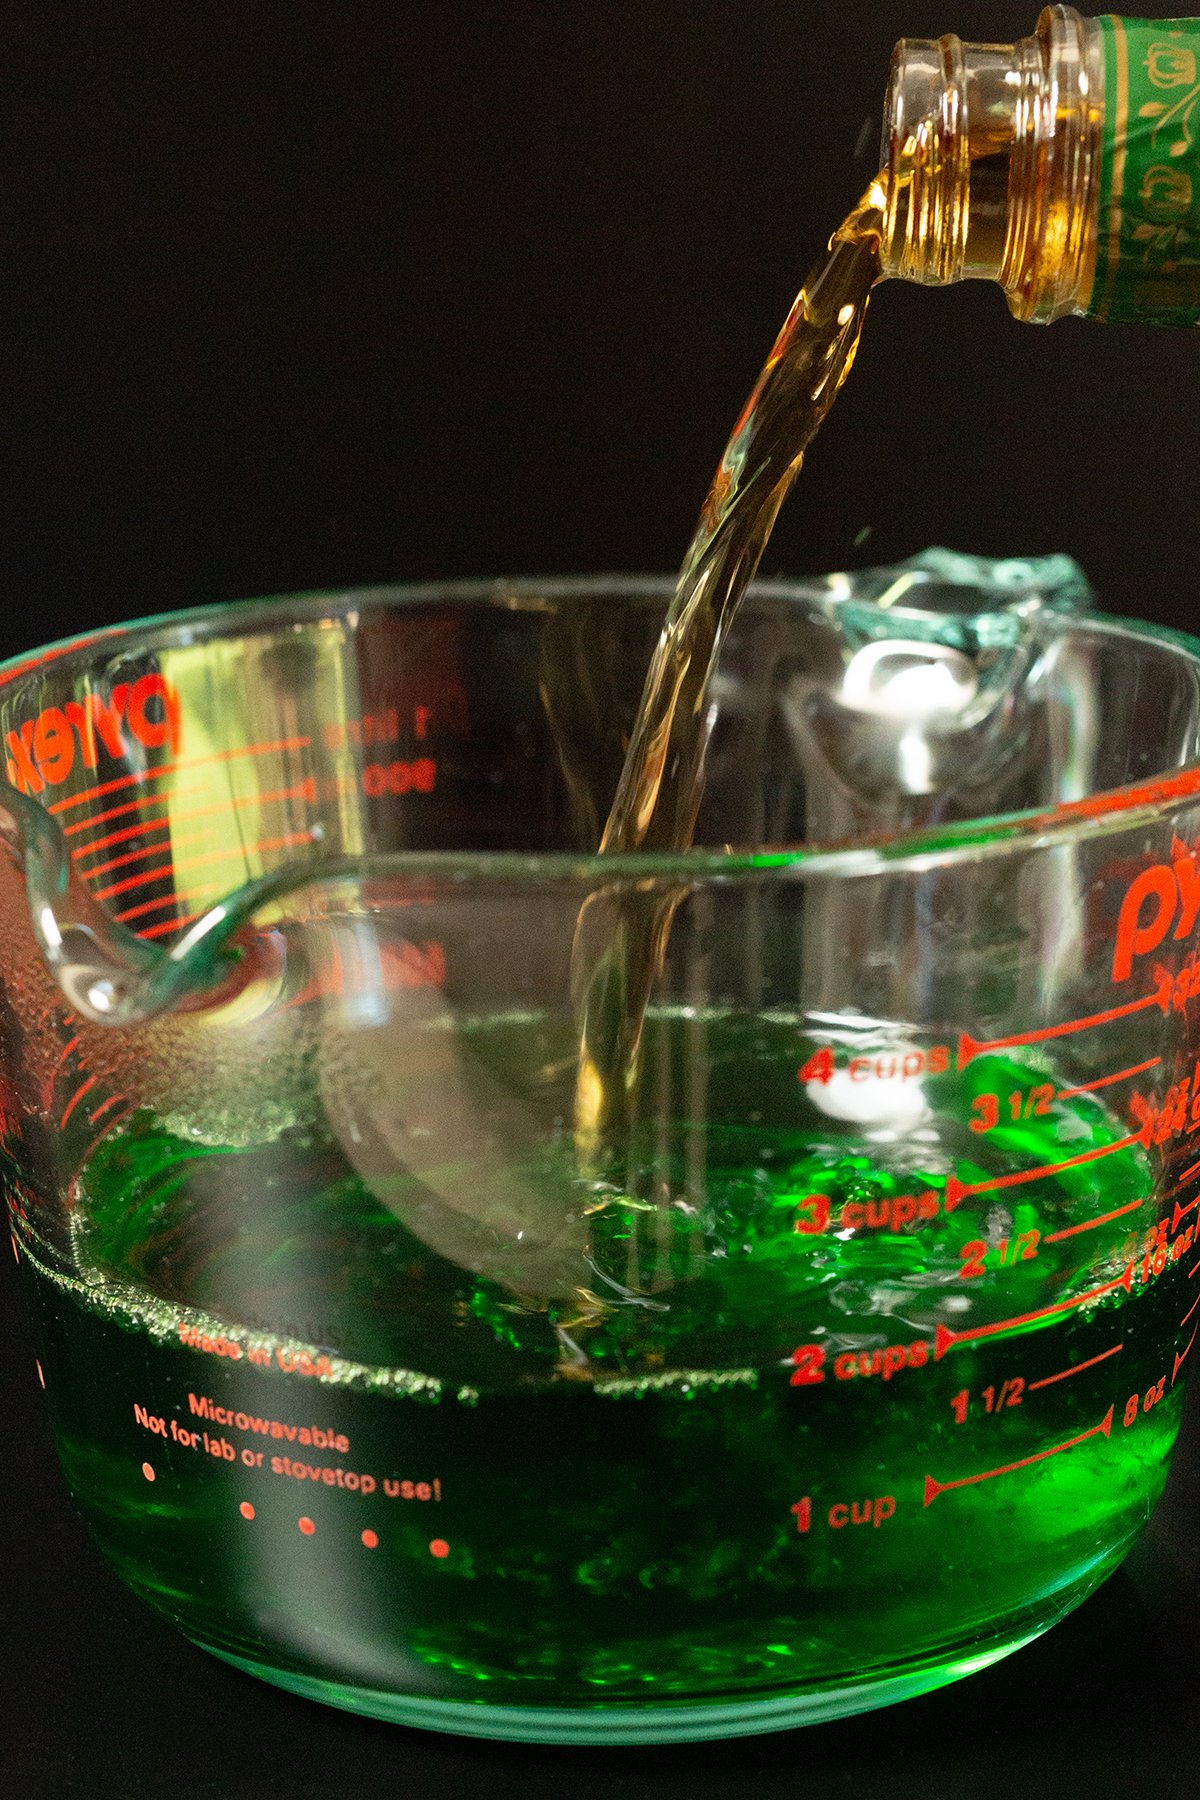 Crown Apple whisky poured from the bottle into a large measuring cup with green apple gelatin.